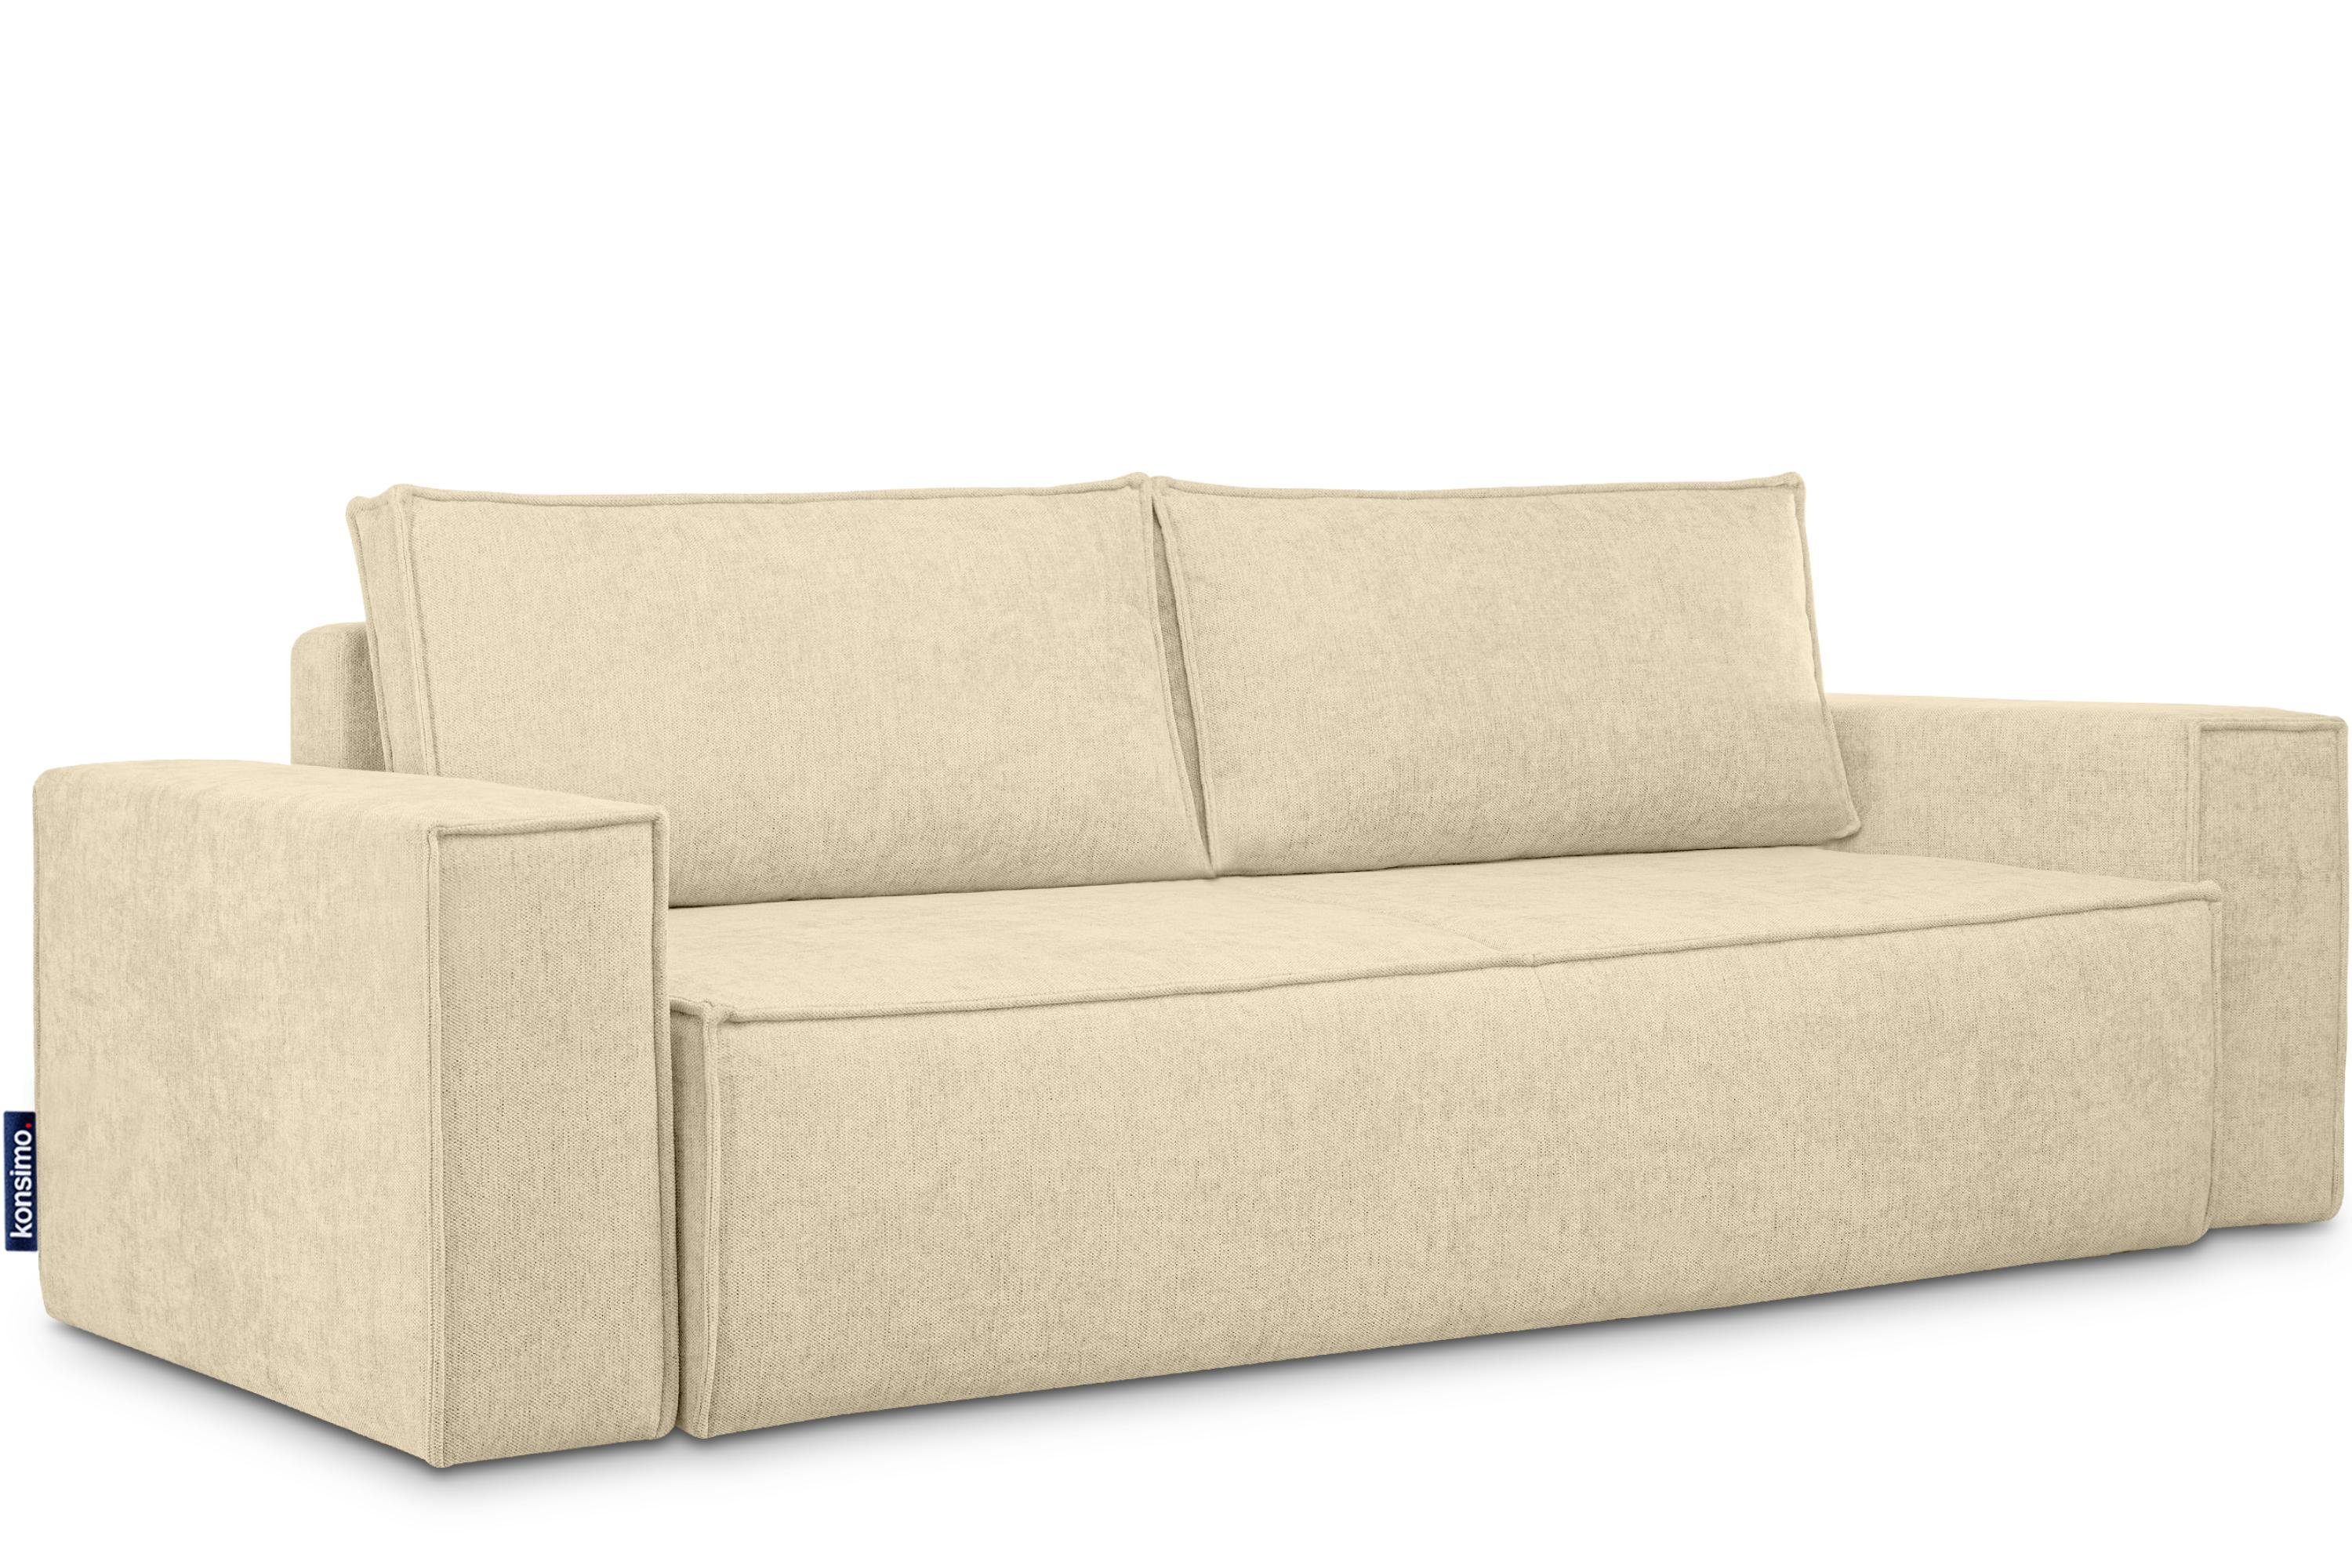 Dunkle Sofas online kaufen » Dunkle Couches | OTTO